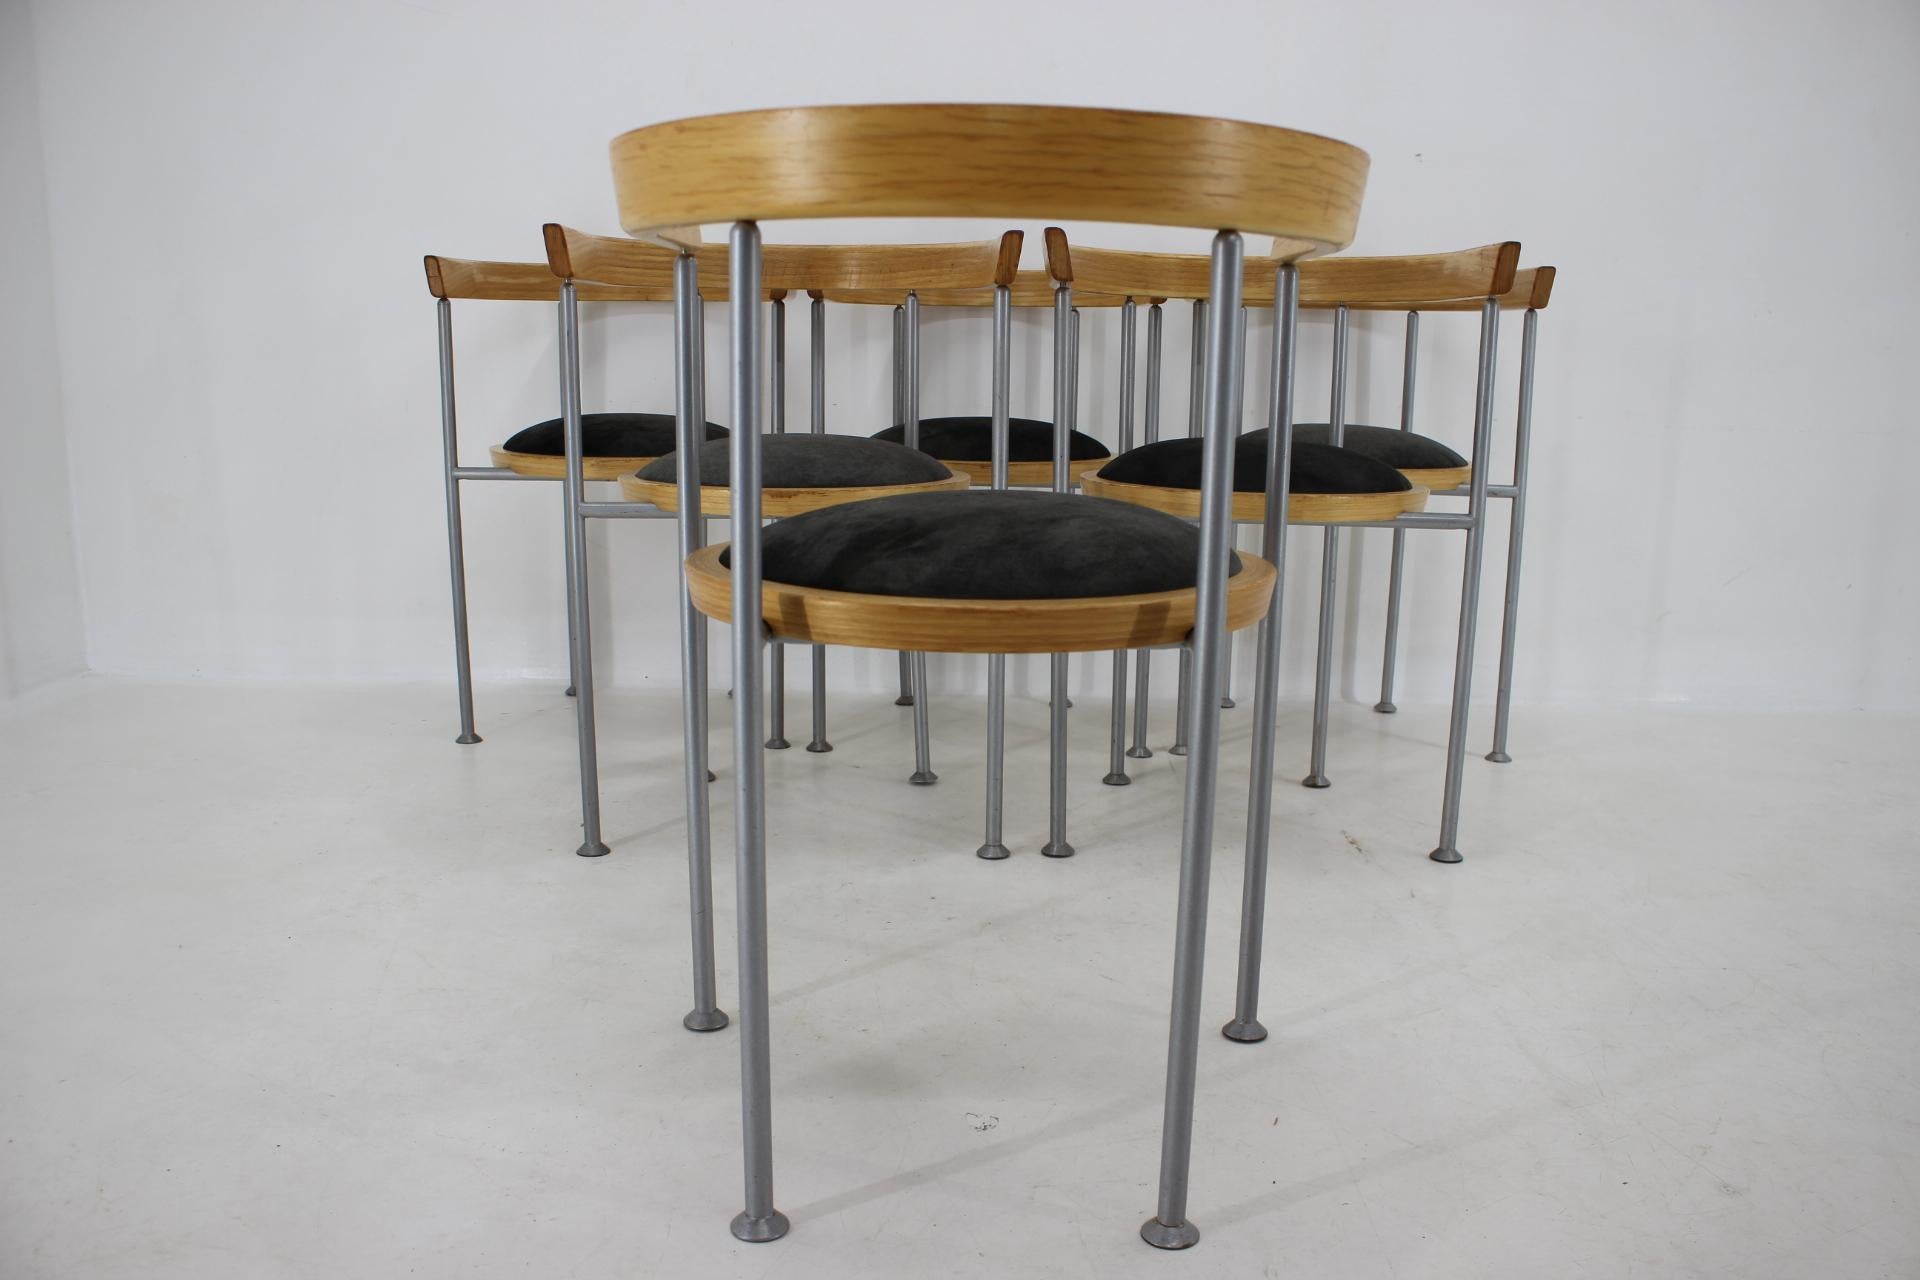 1990s Borge Lindau Set of 6 Dining Chairs for Bla Station, Sweden For Sale 1